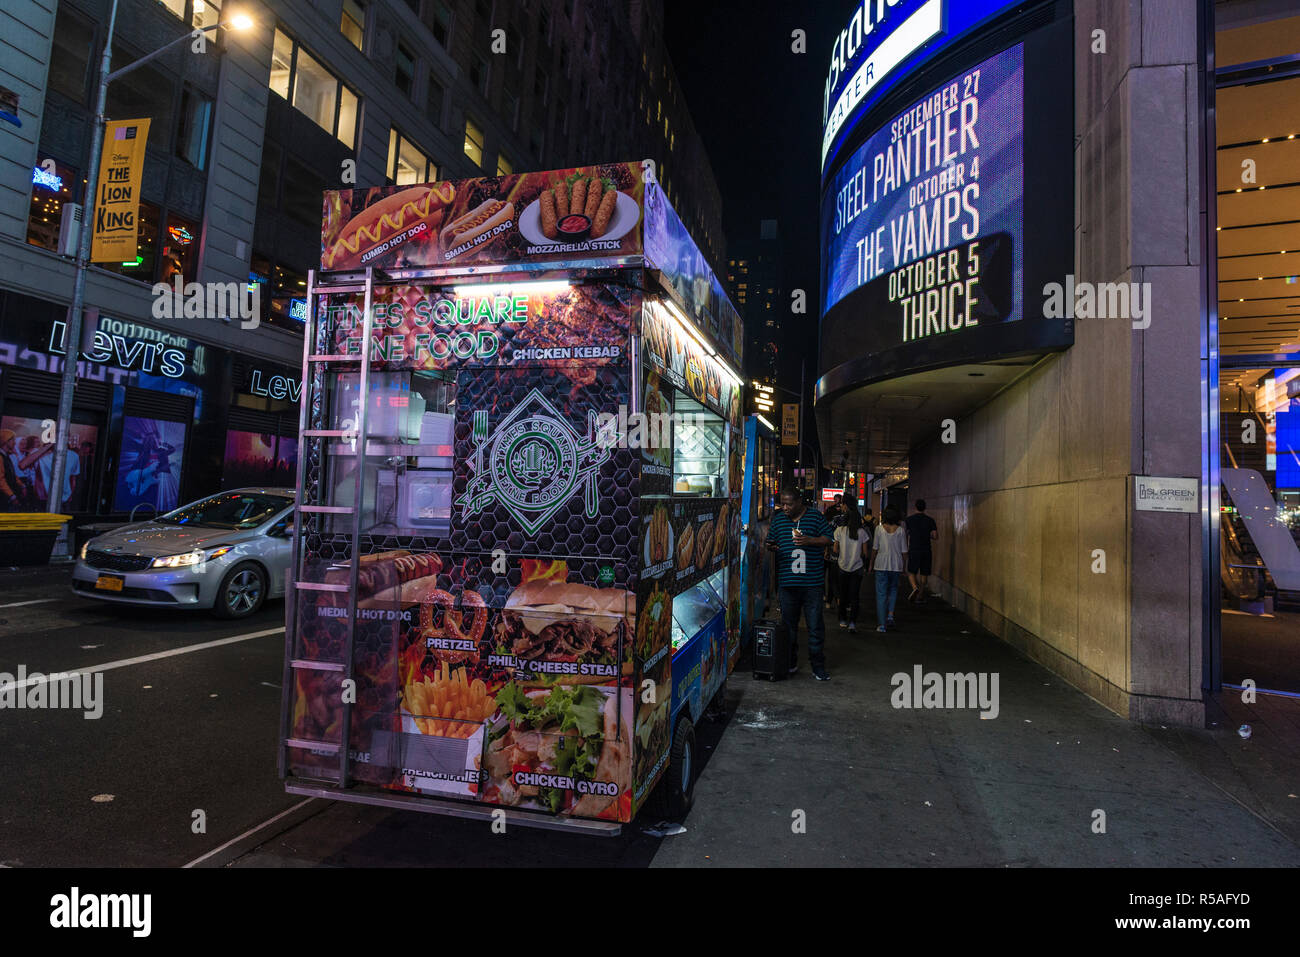 New York City, USA - July 30, 2018: Times Square at night with people around and large advertising screens in Manhattan in New York City, USA Stock Photo